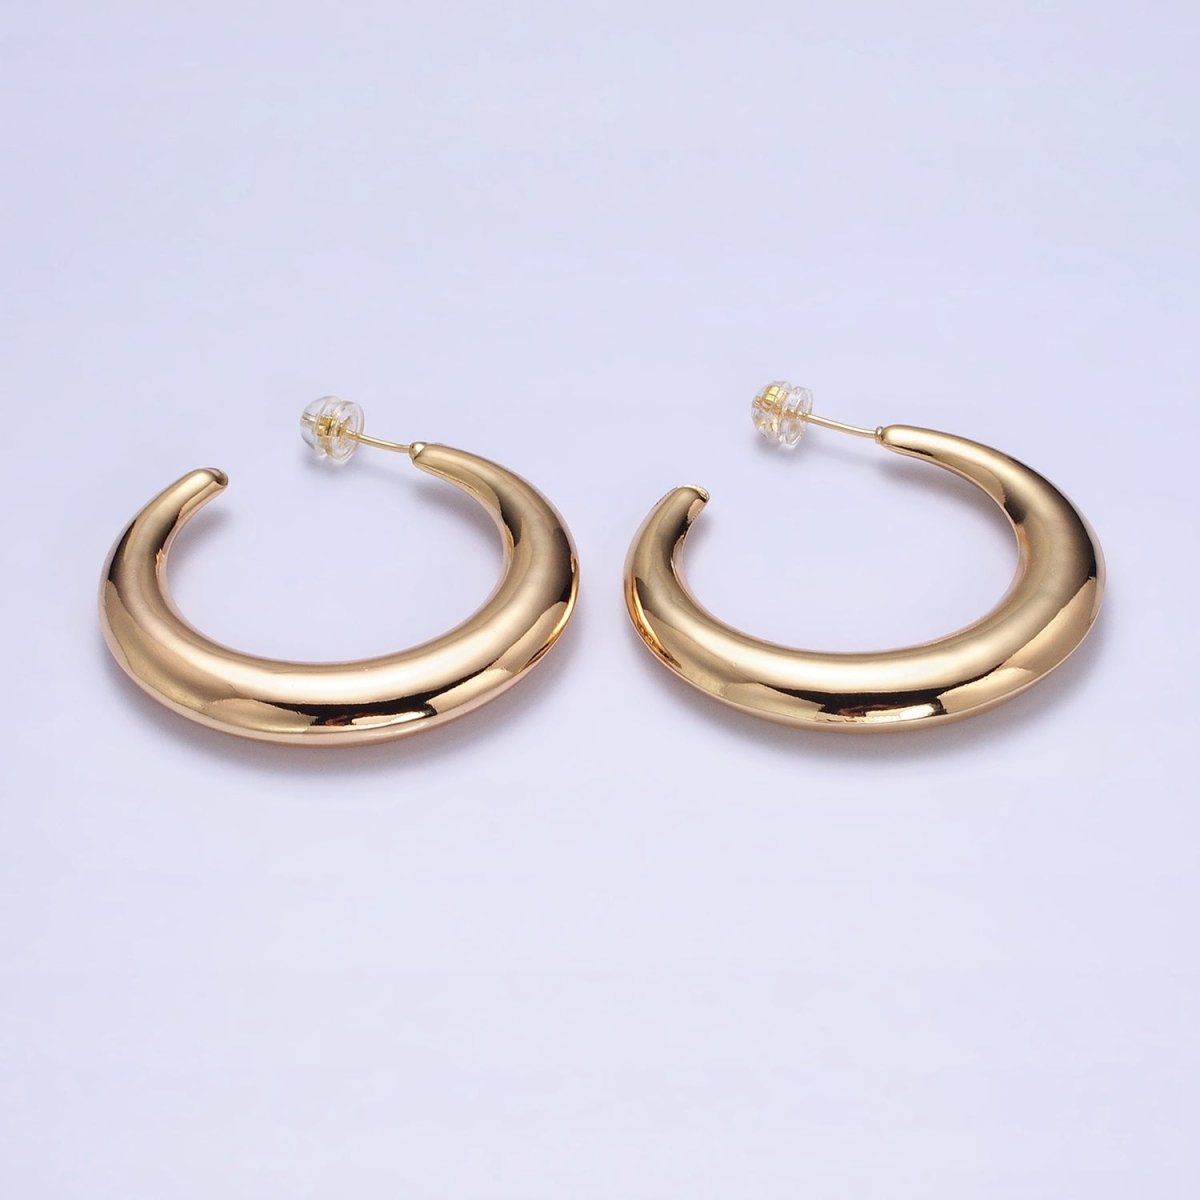 OS 16K Gold Filled 40.5mm C-Shaped Chubby Band Circular Hoop Earrings in Gold & Silver | AD1191 AD1192 - DLUXCA